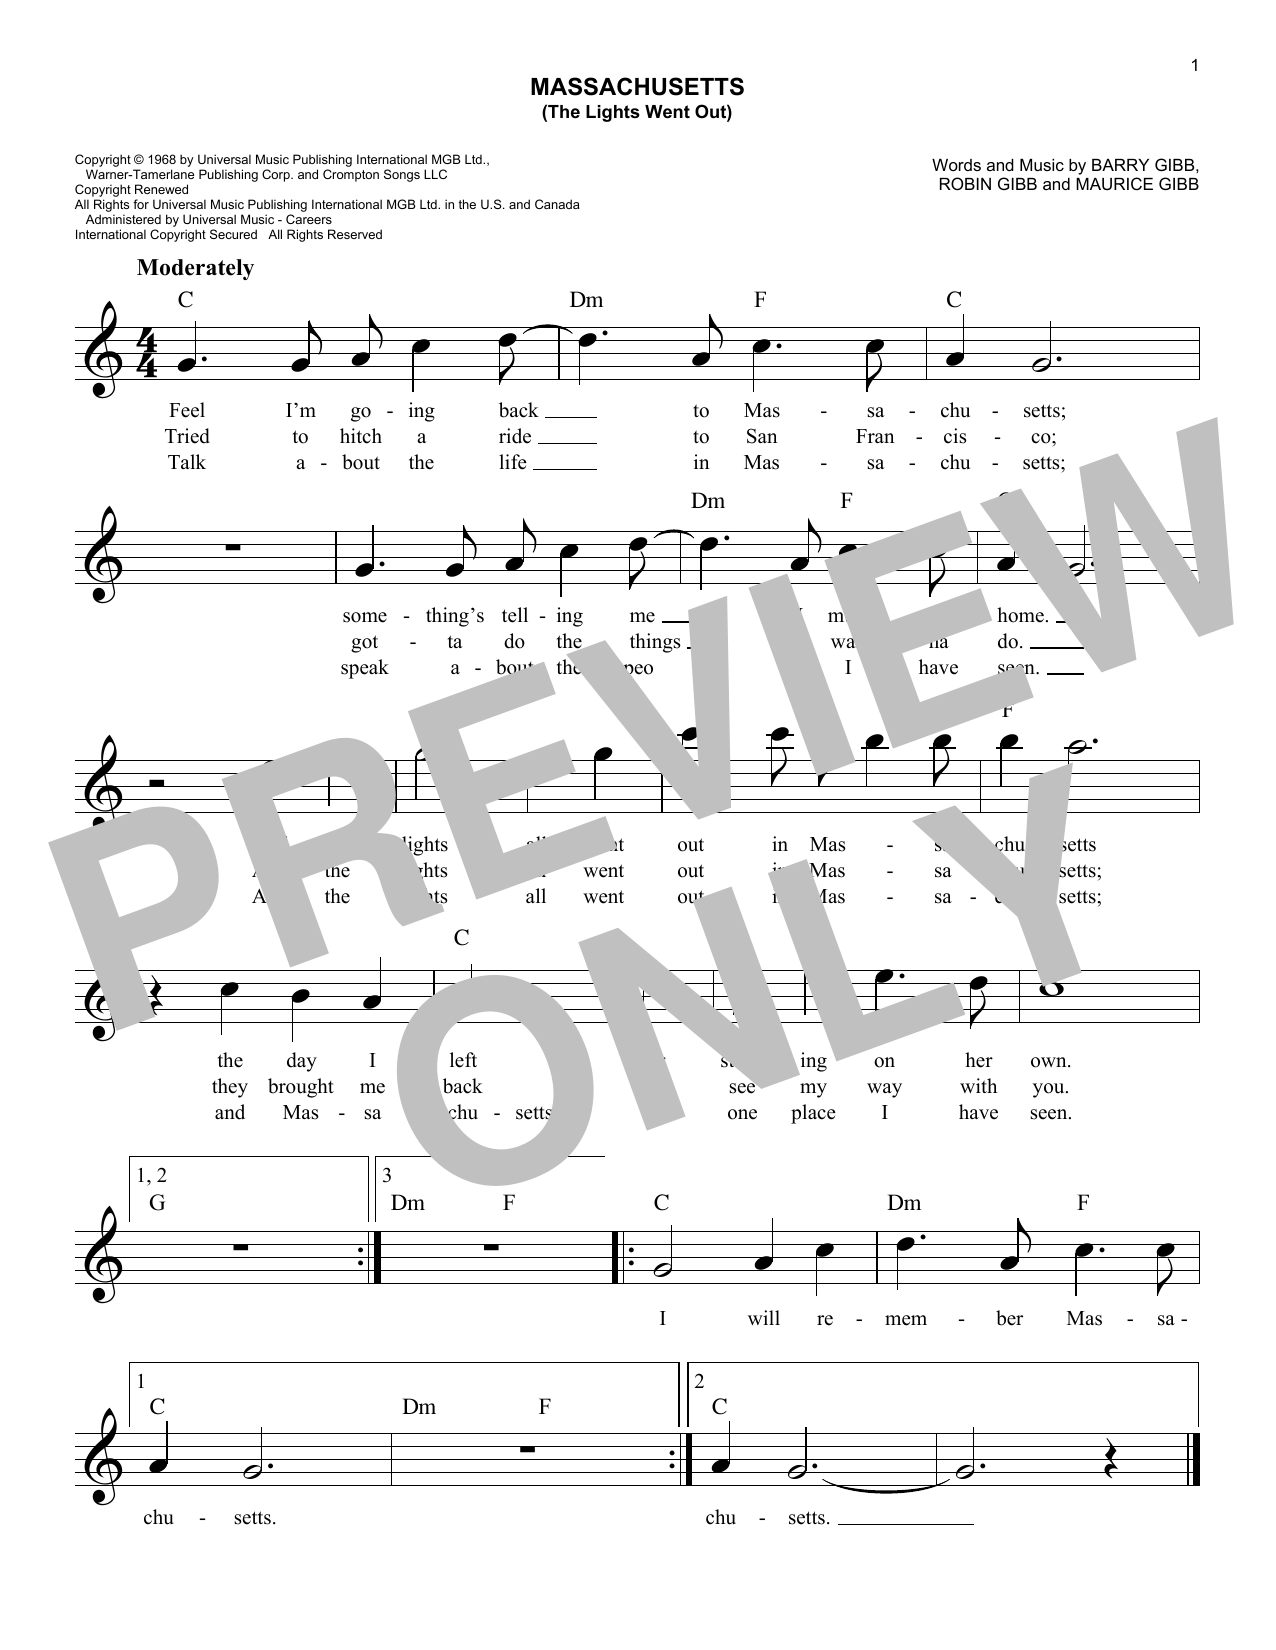 Download Bee Gees Massachusetts (The Lights Went Out) Sheet Music